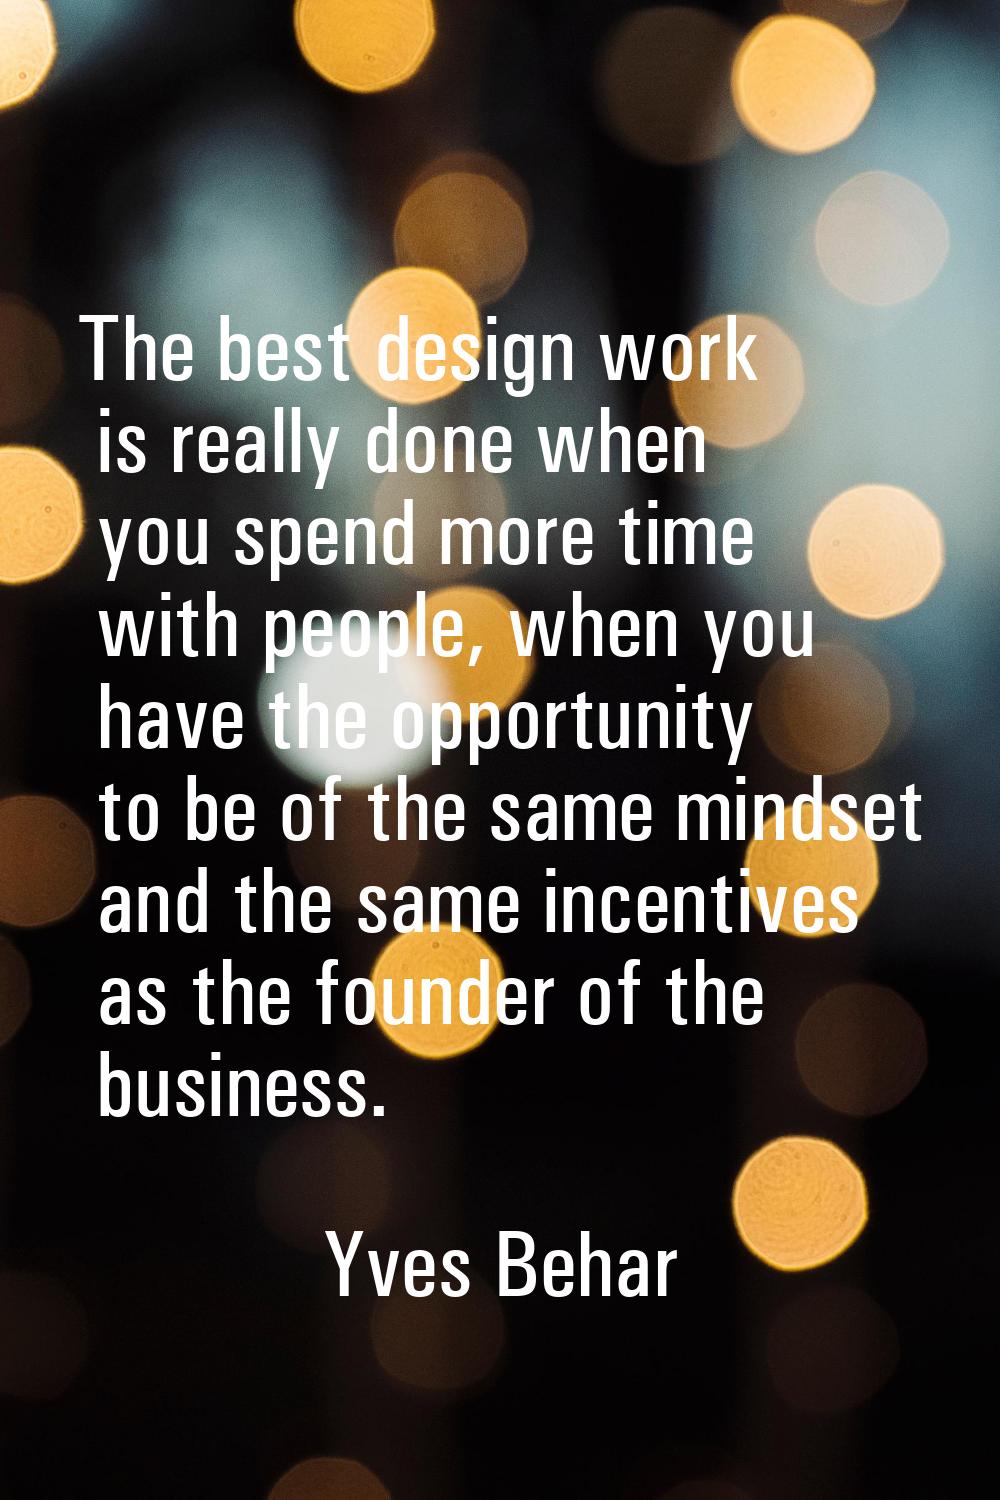 The best design work is really done when you spend more time with people, when you have the opportu